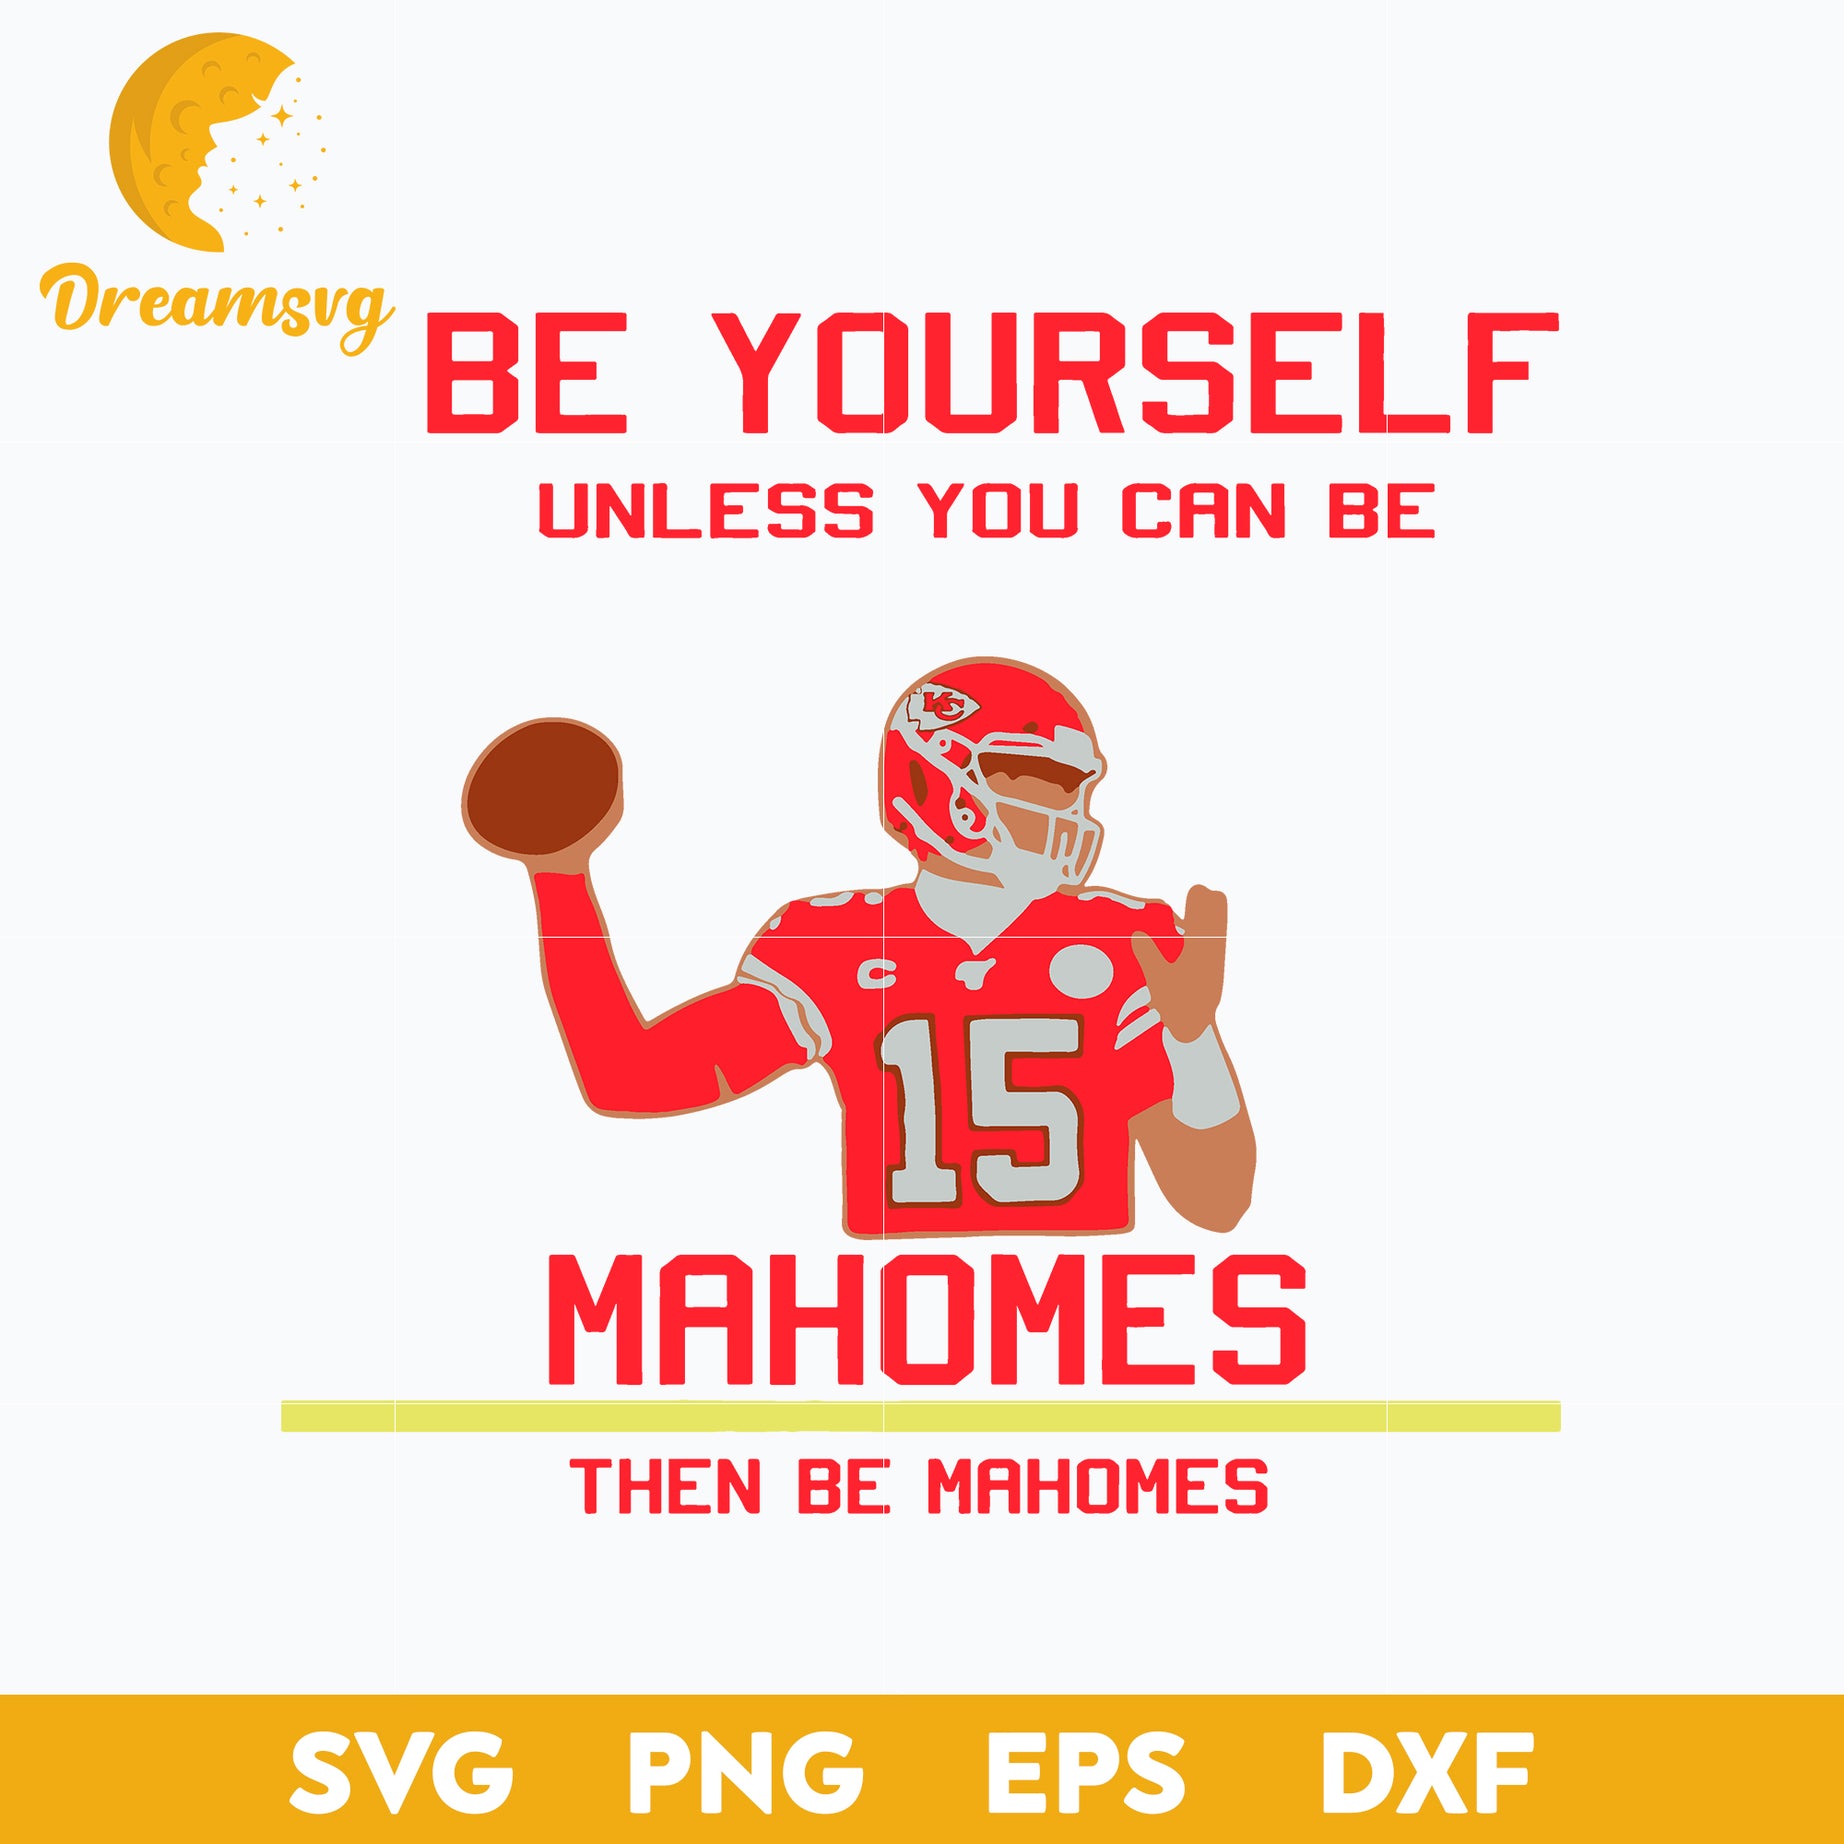 Be Yourself Unless You Can Be Mahomes Then Be Mahomes Svg, Sport Svg, Funny Svg, Png, Dxf, Eps Digital File.